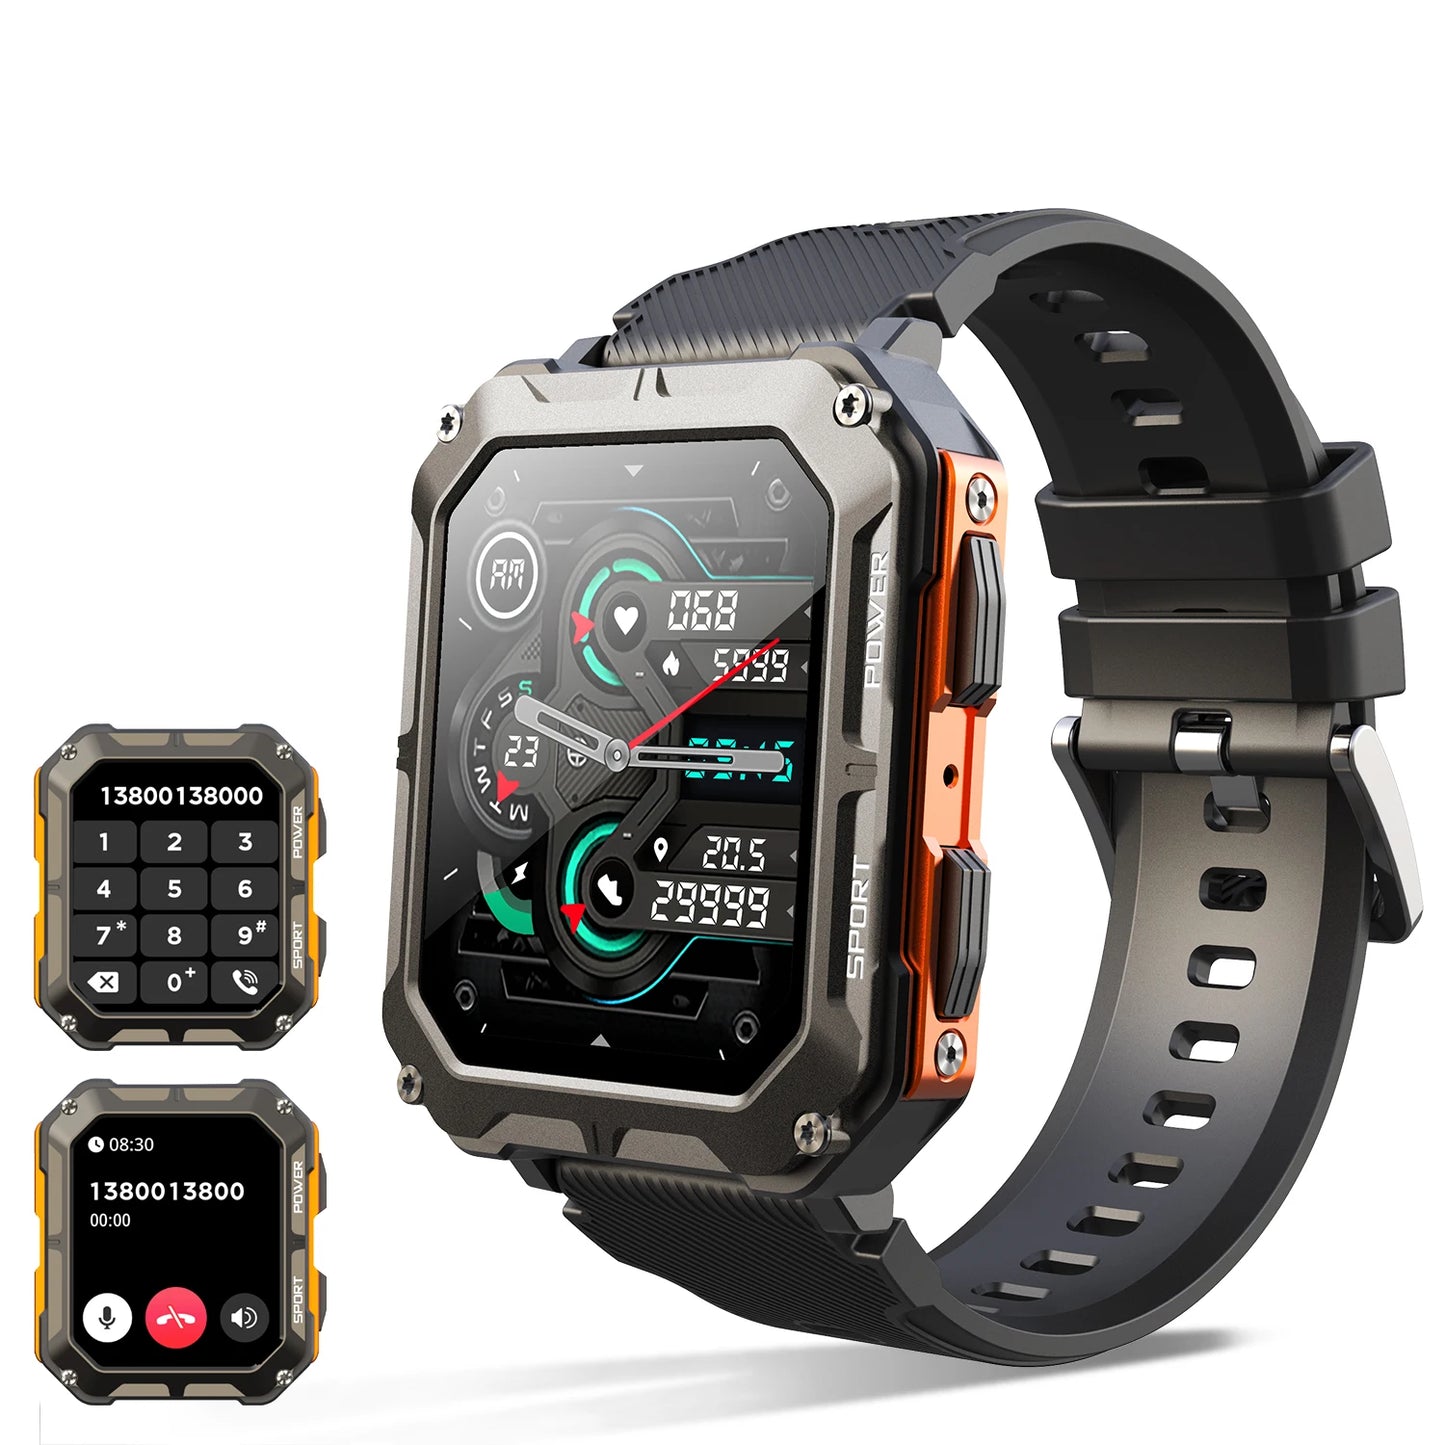 The Indestructible Smart Watch